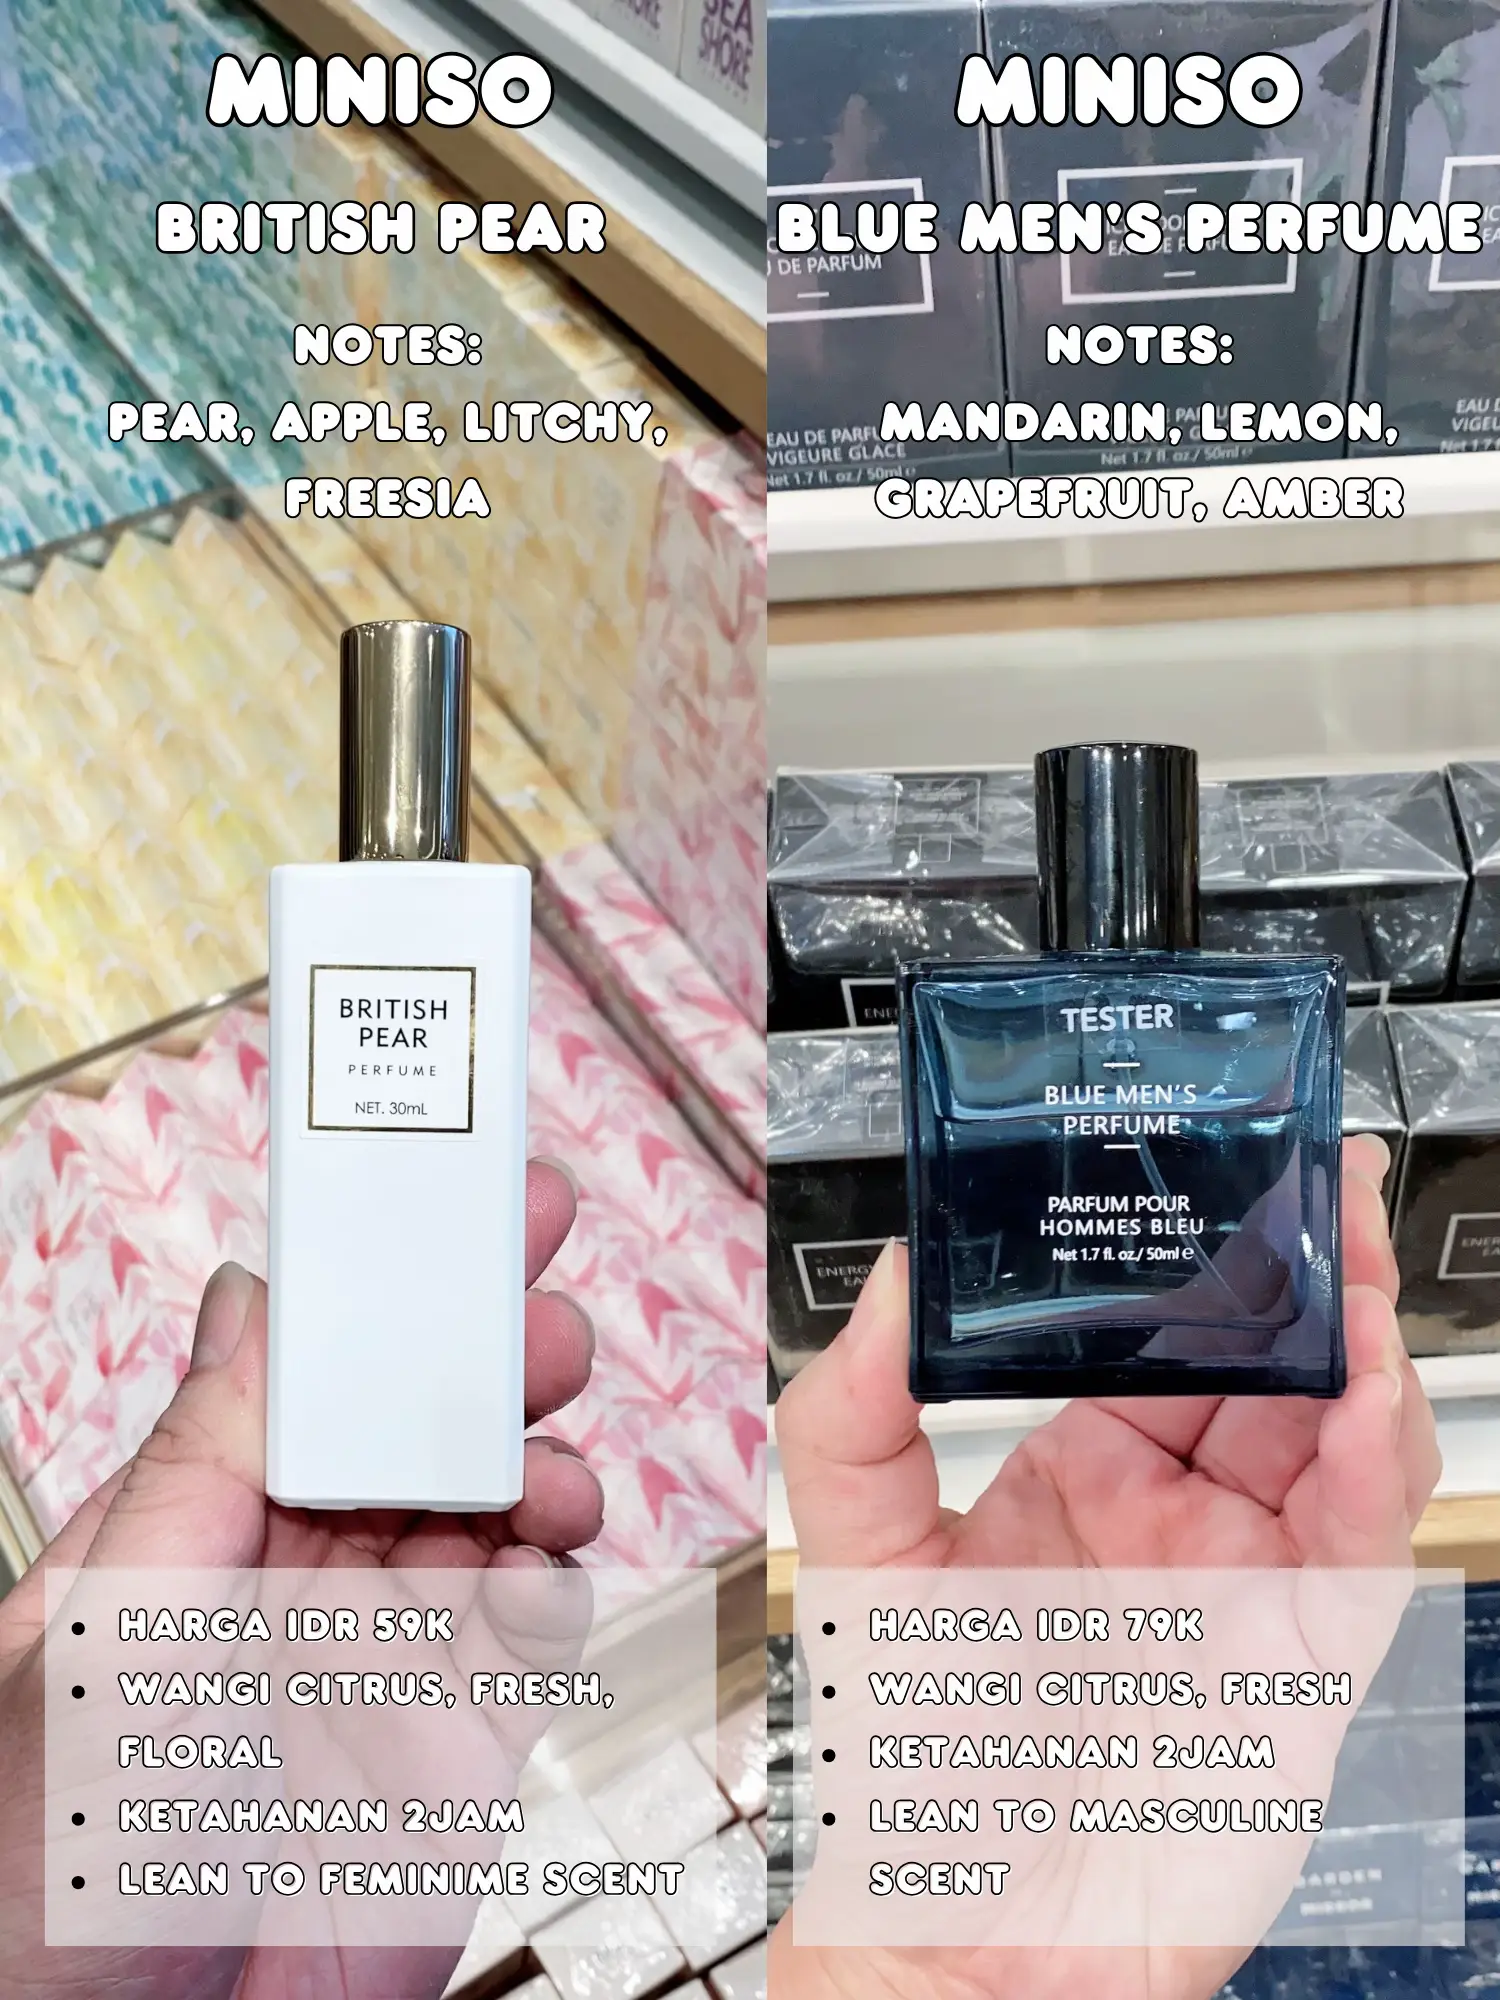 Top dupe perfume in Miniso, Gallery posted by anderscent